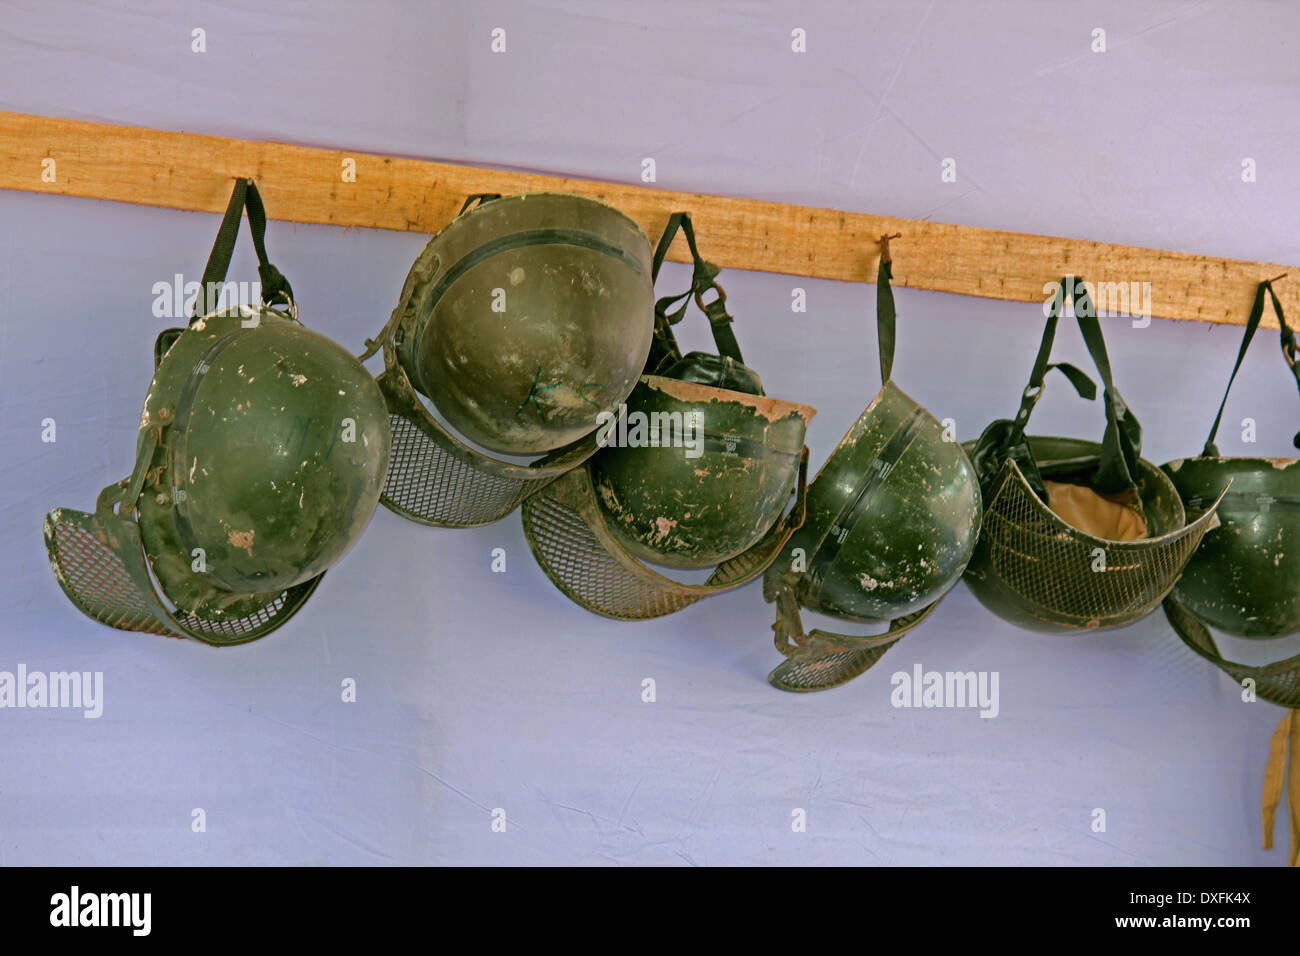 Anti Riot Police Helmets hanging at police station, india Stock Photo